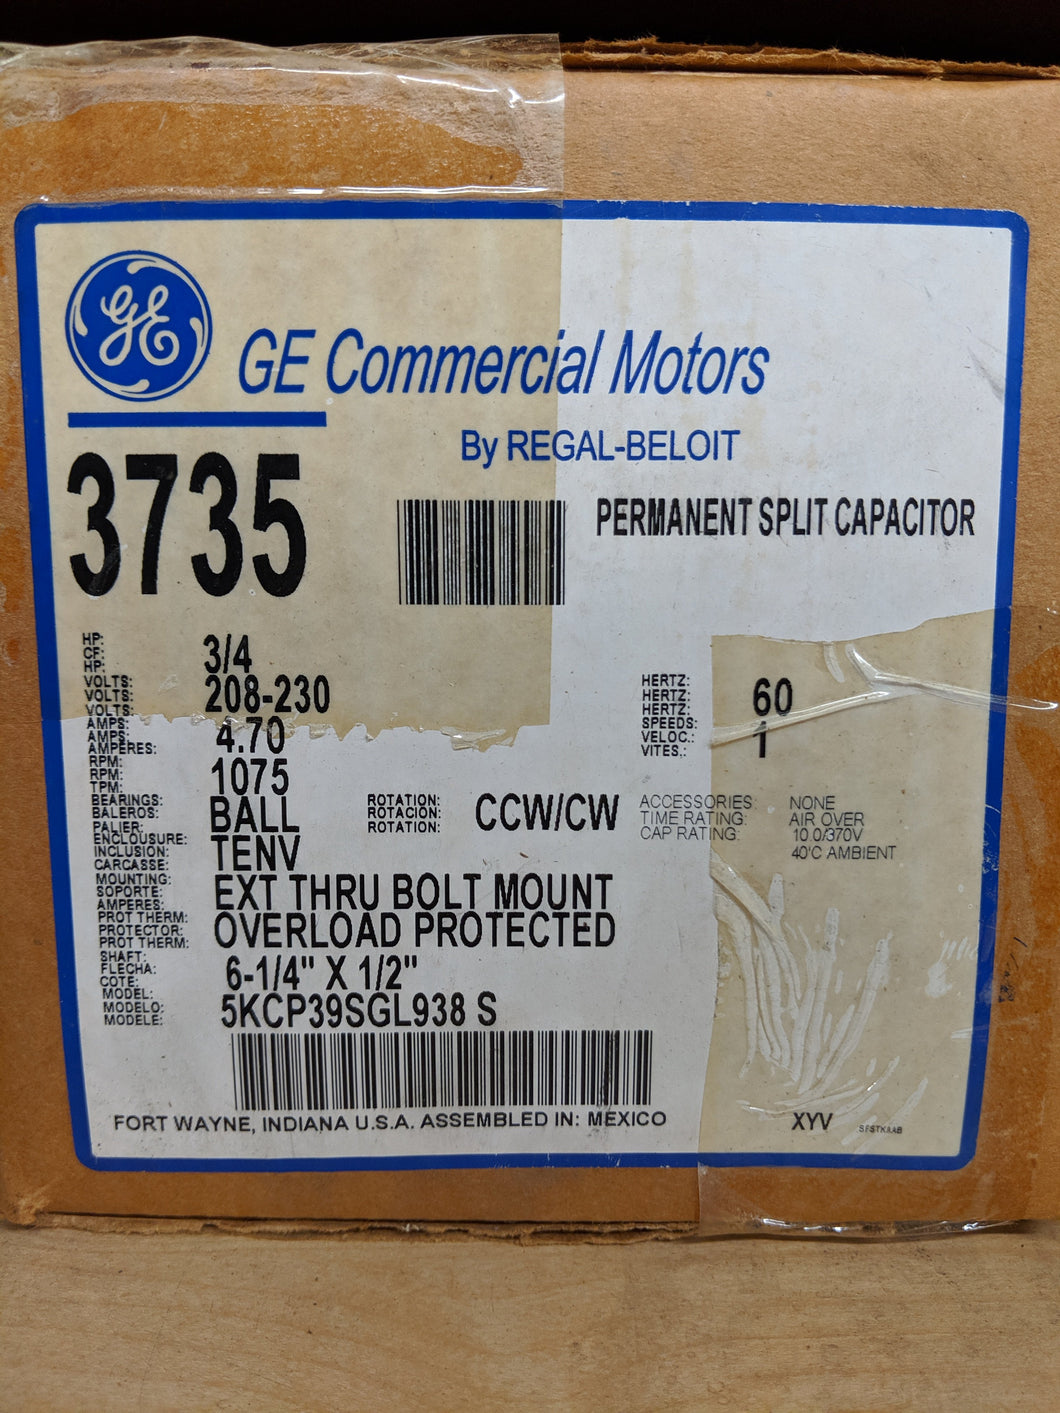 GE 3735, 3/4 HP, 208-230 Volts, 5KCP39SGL938S